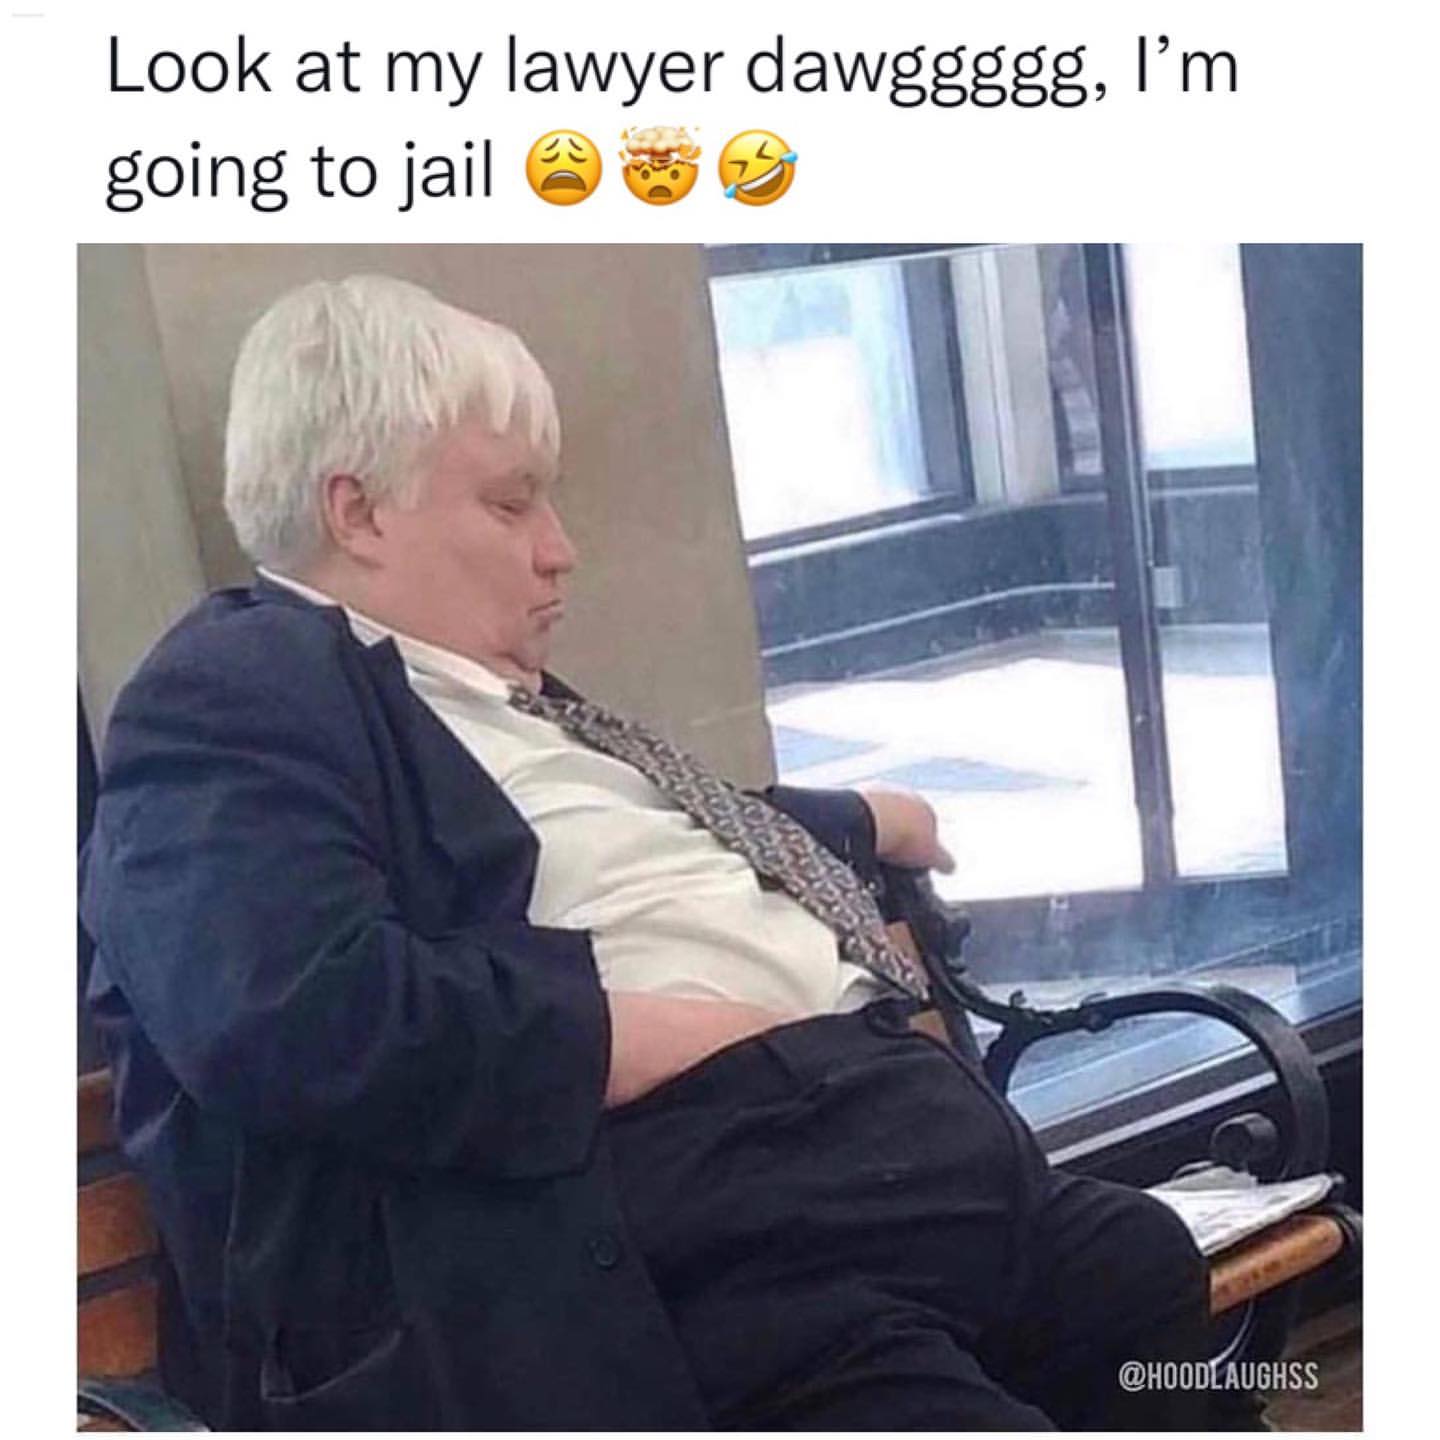 Look at my lawyer dawggggg, I'm going to jail.